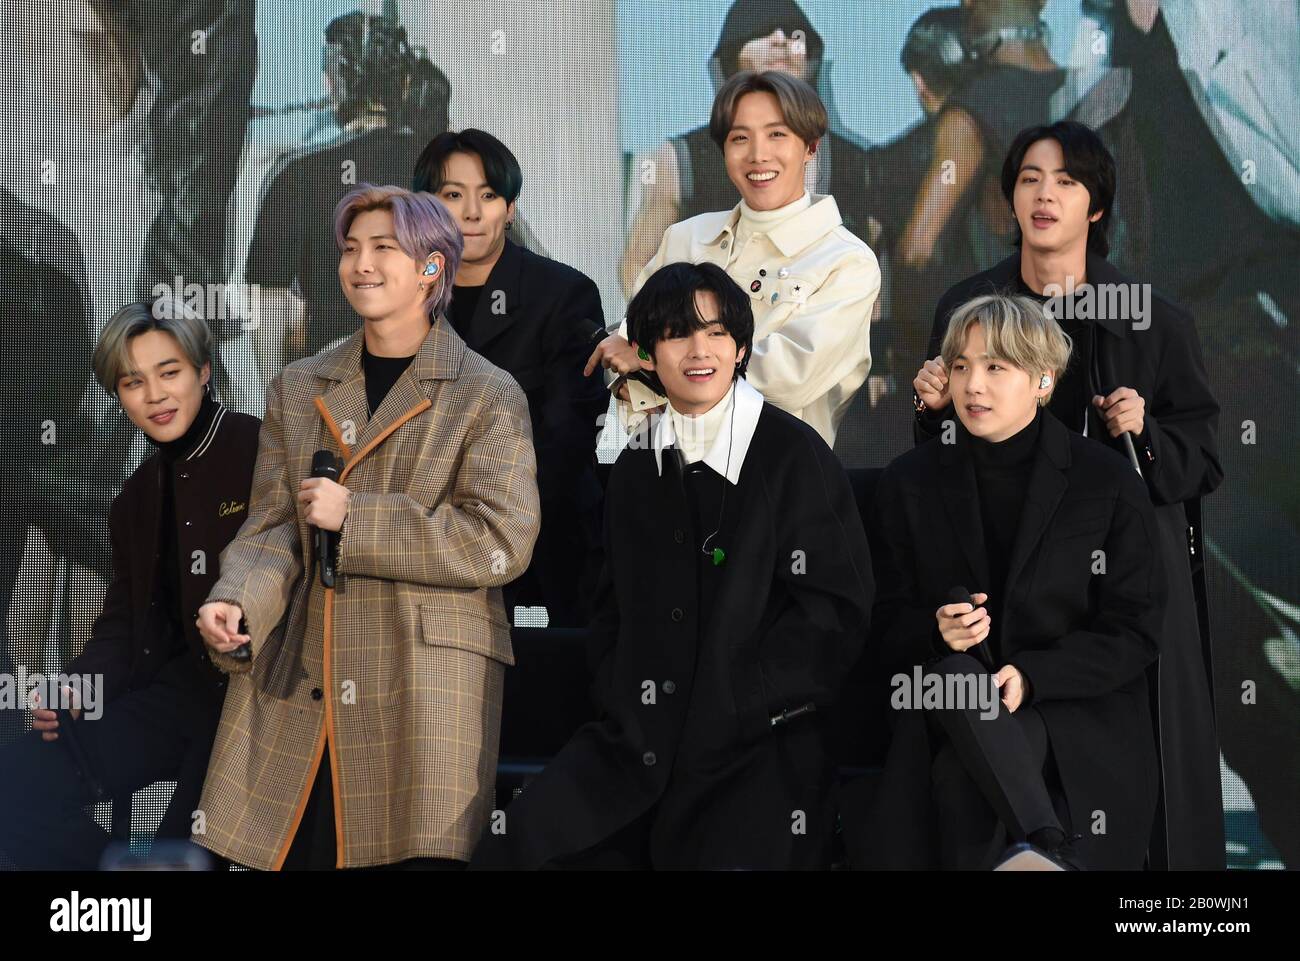 New York, NY, USA. 21st Feb, 2020. BTS, Korean Pop Band at a public appearance for BTS Live Interview on the NBC Today Show, Rockefeller Center Today Show Plaza, New York, NY February 21, 2020. Credit: Kristin Callahan/Everett Collection/Alamy Live News Stock Photo